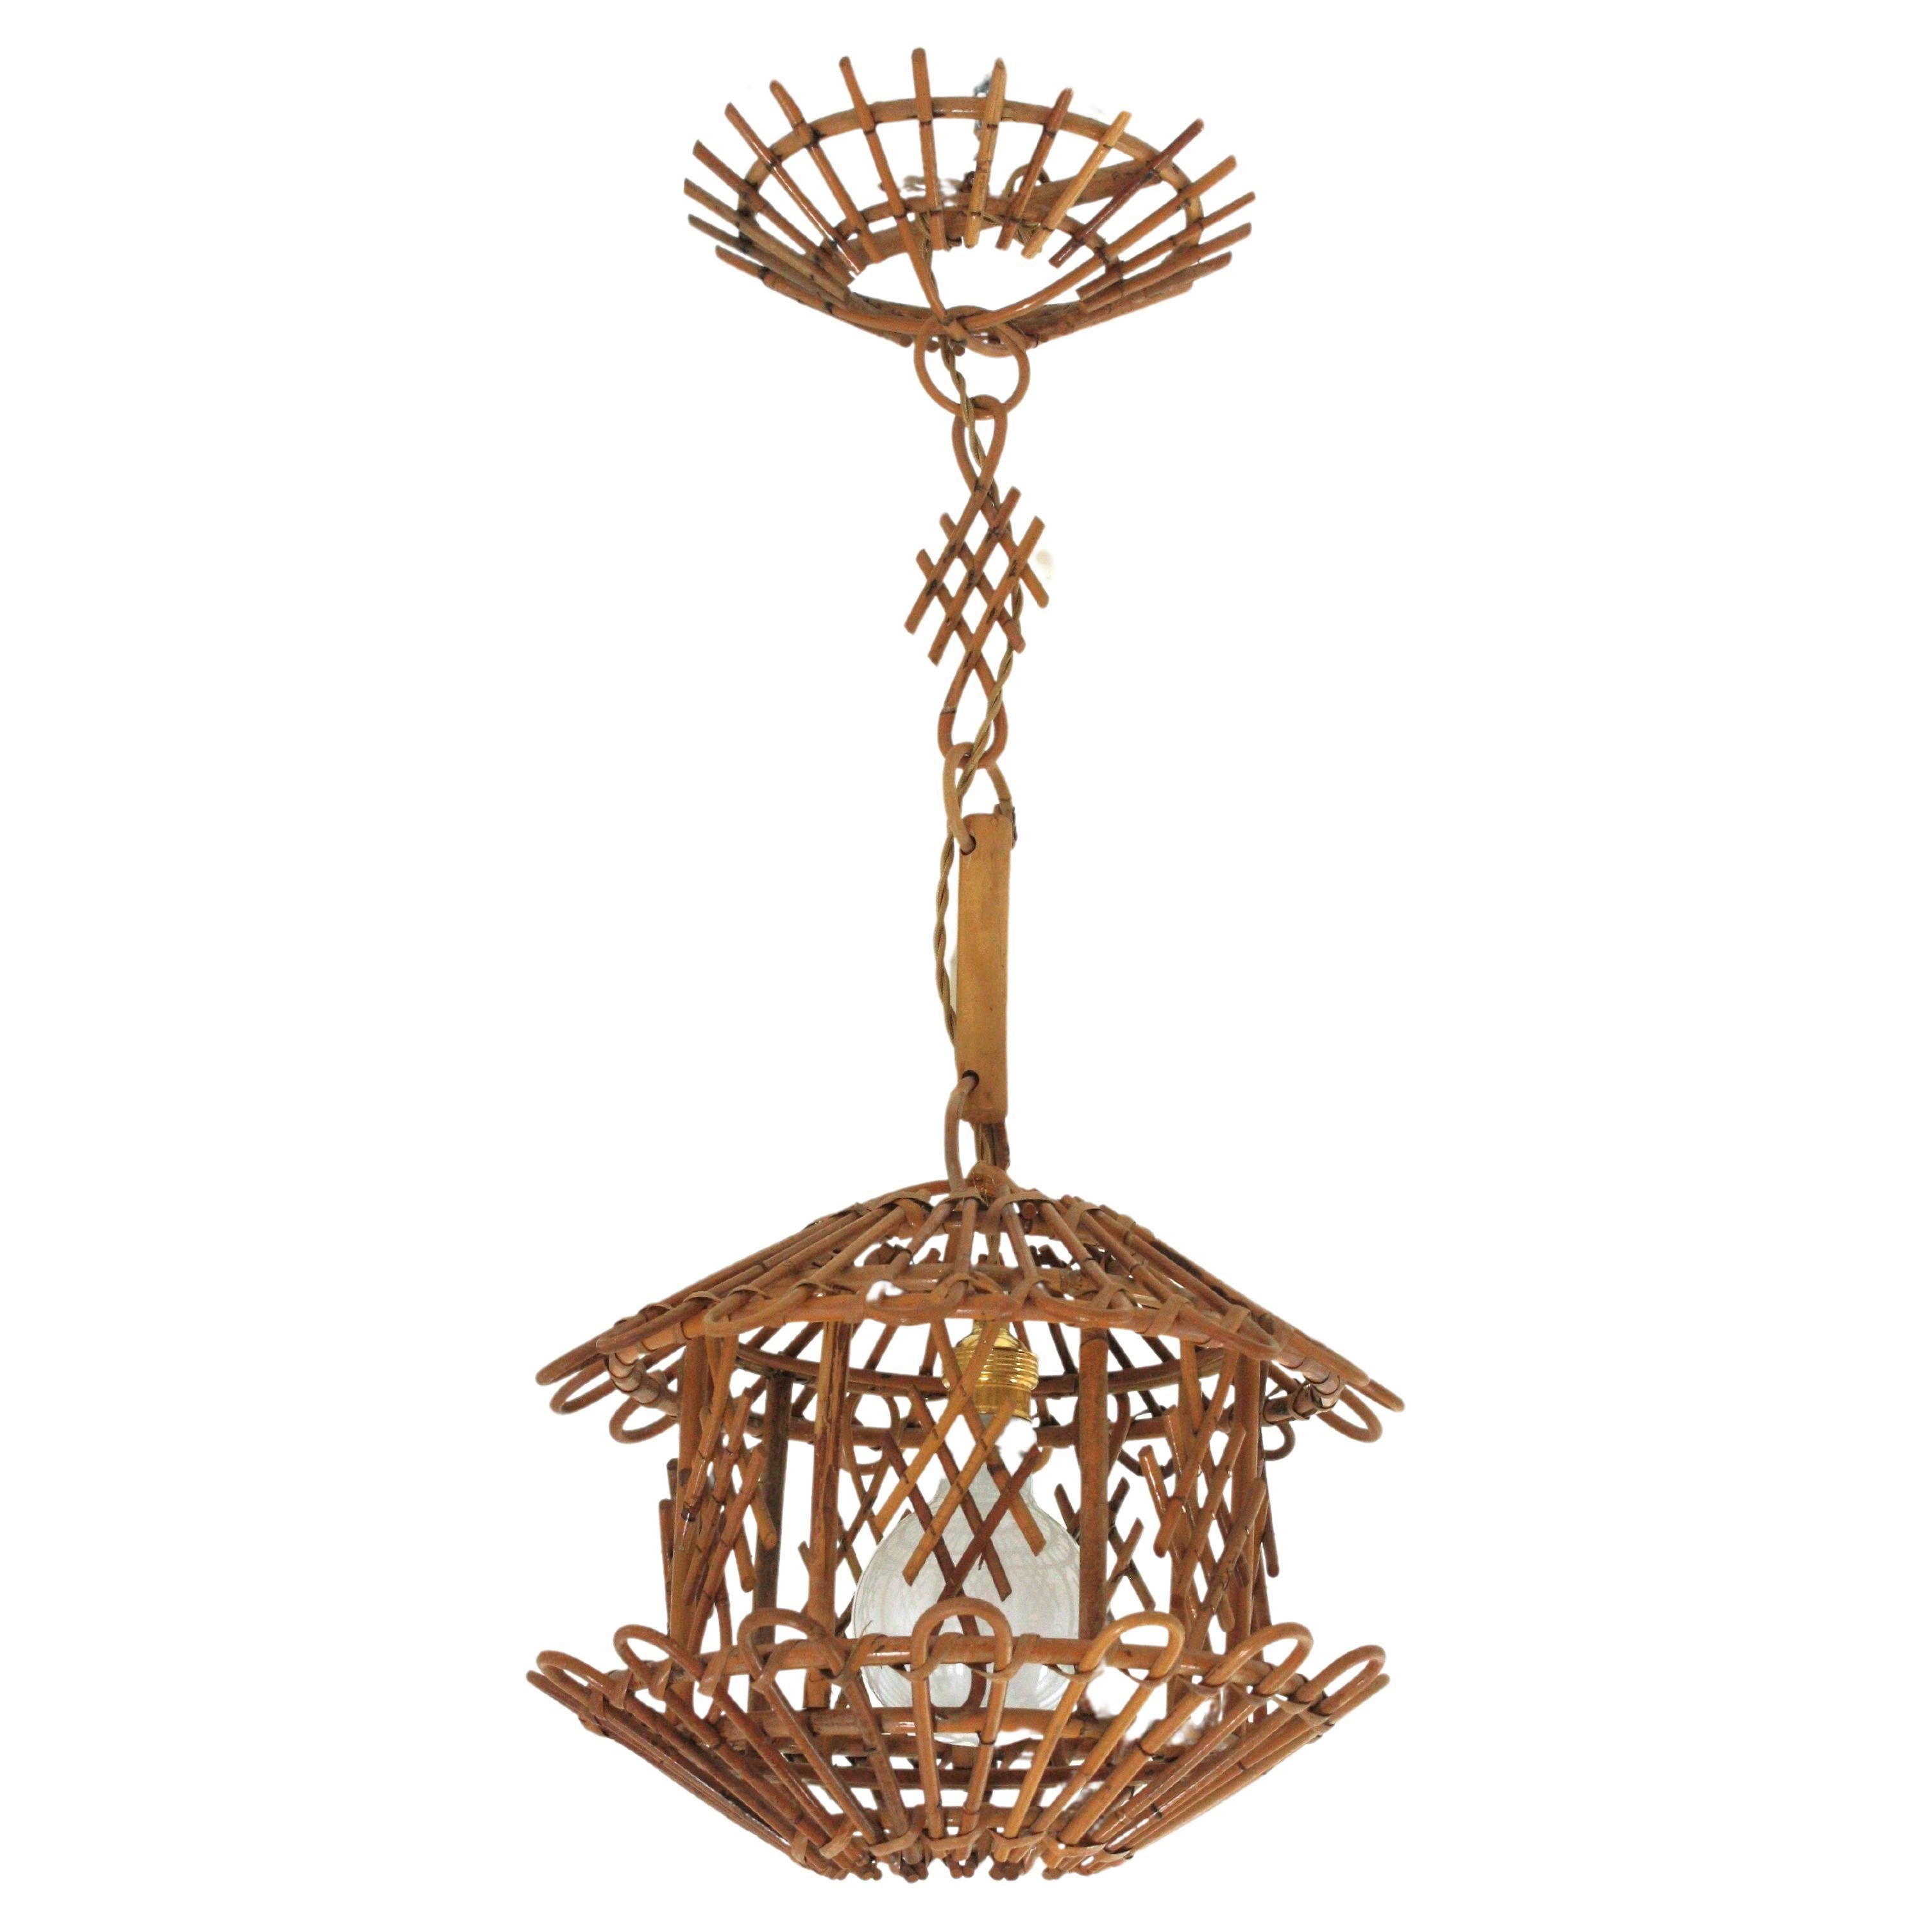 French Modernist Rattan Pendant Lantern / Hanging Light with Chinoiserie Accents